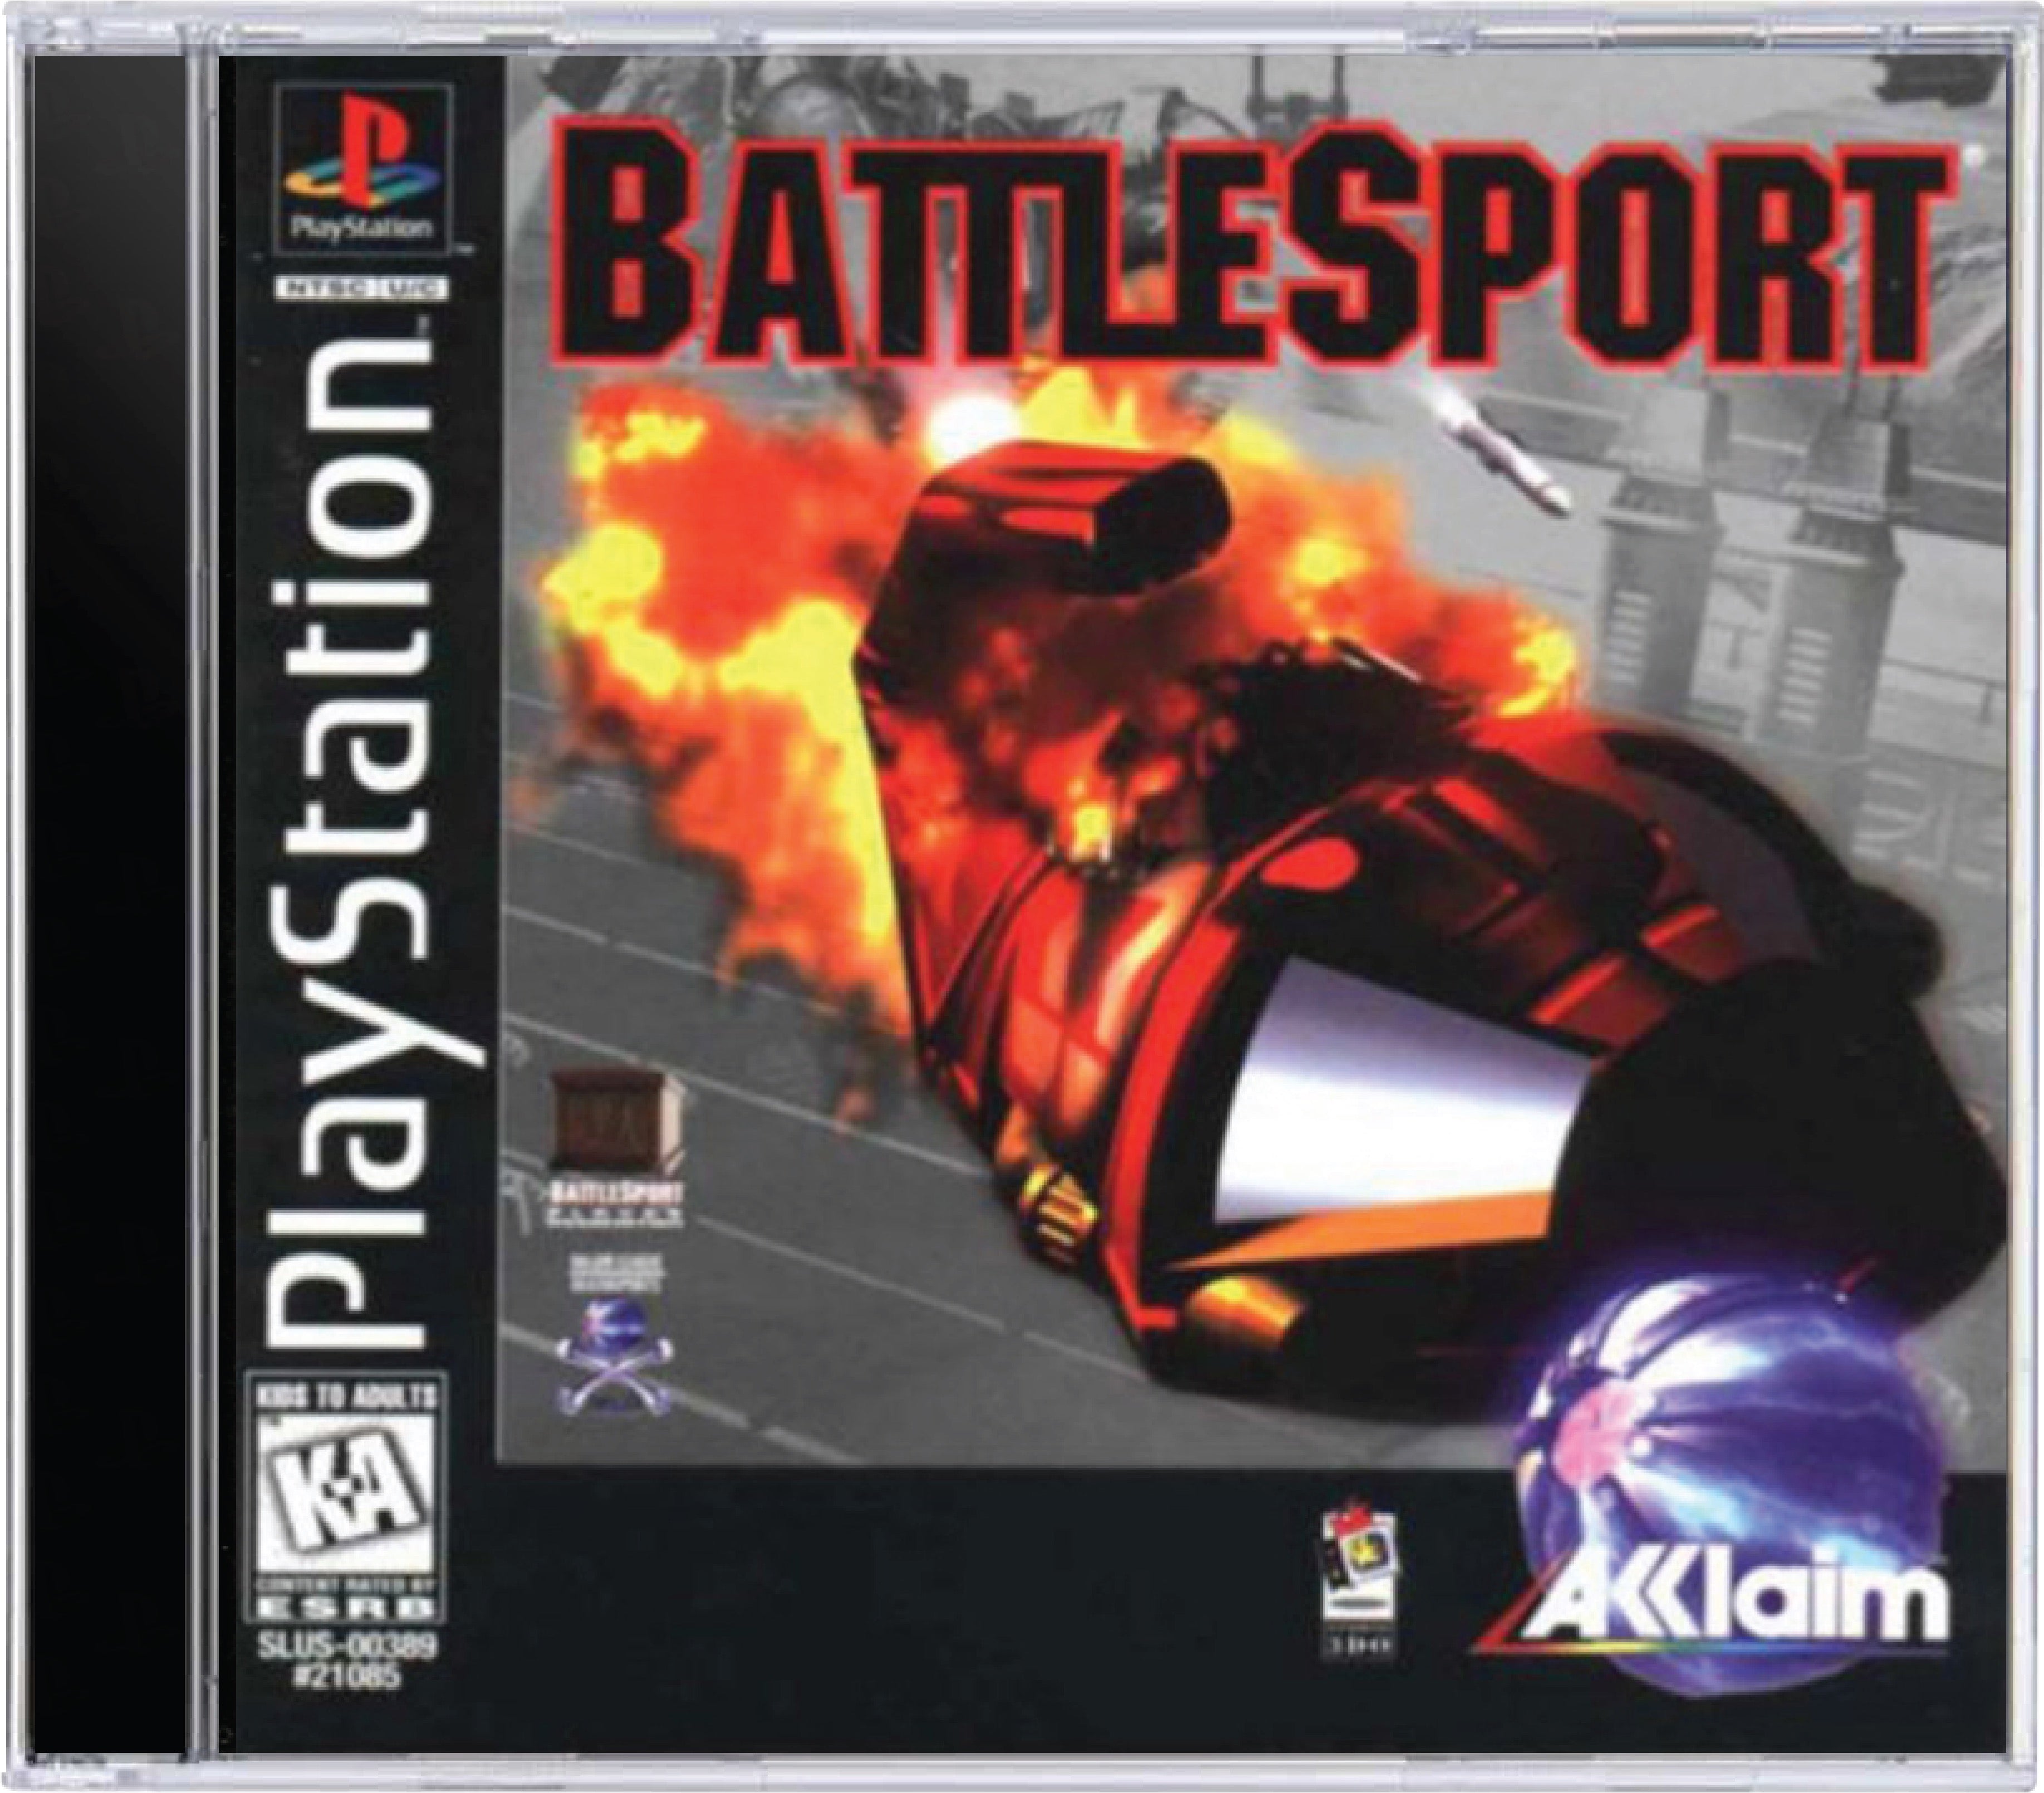 Battlesport Cover Art and Product Photo